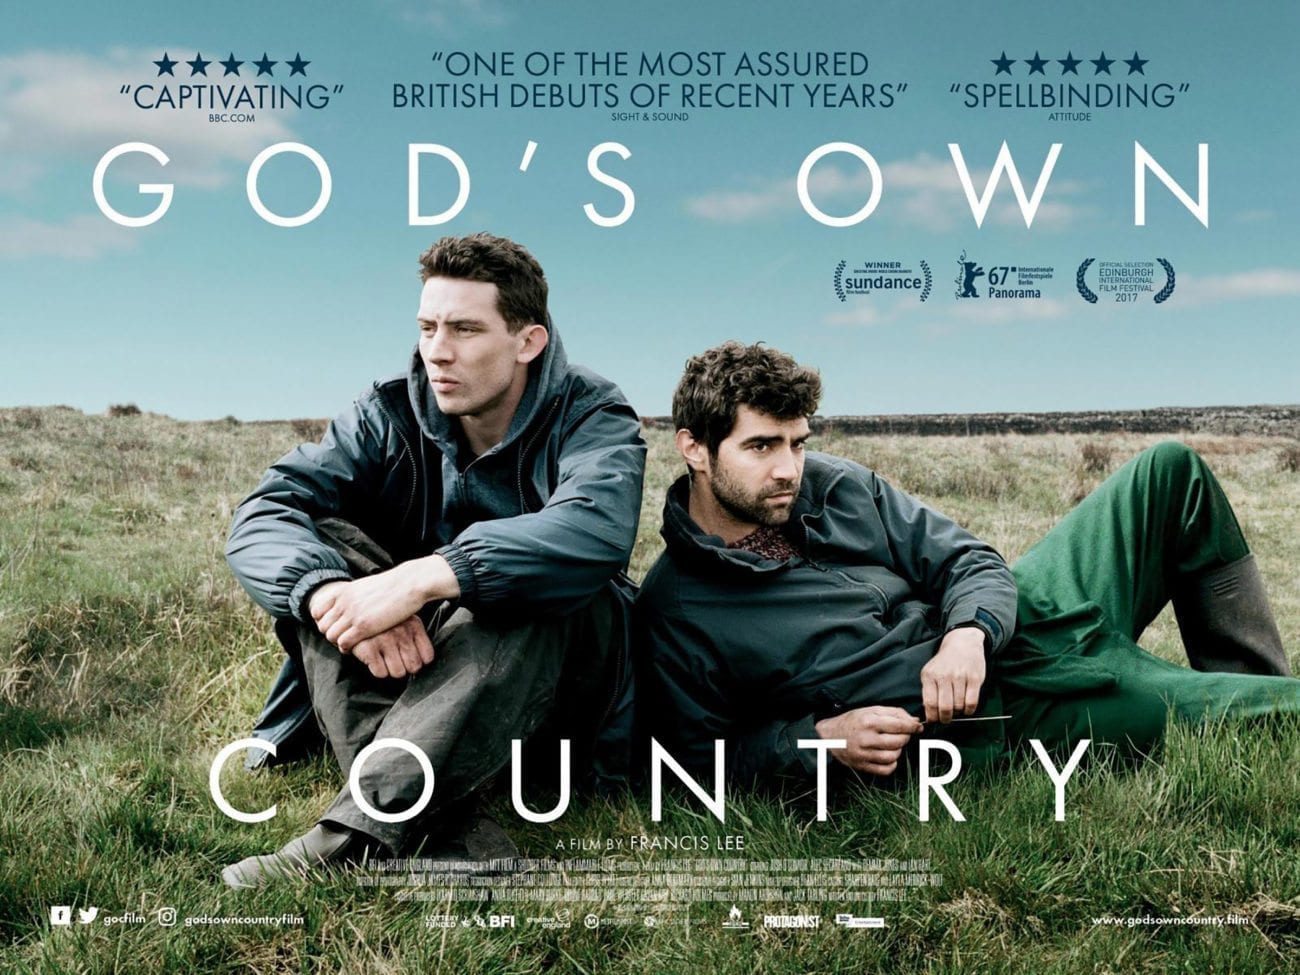 Picturehouse Entertainment has premiered the first trailer for Francis Lee’s God’s Own Country, set for theatrical release this September in the UK.